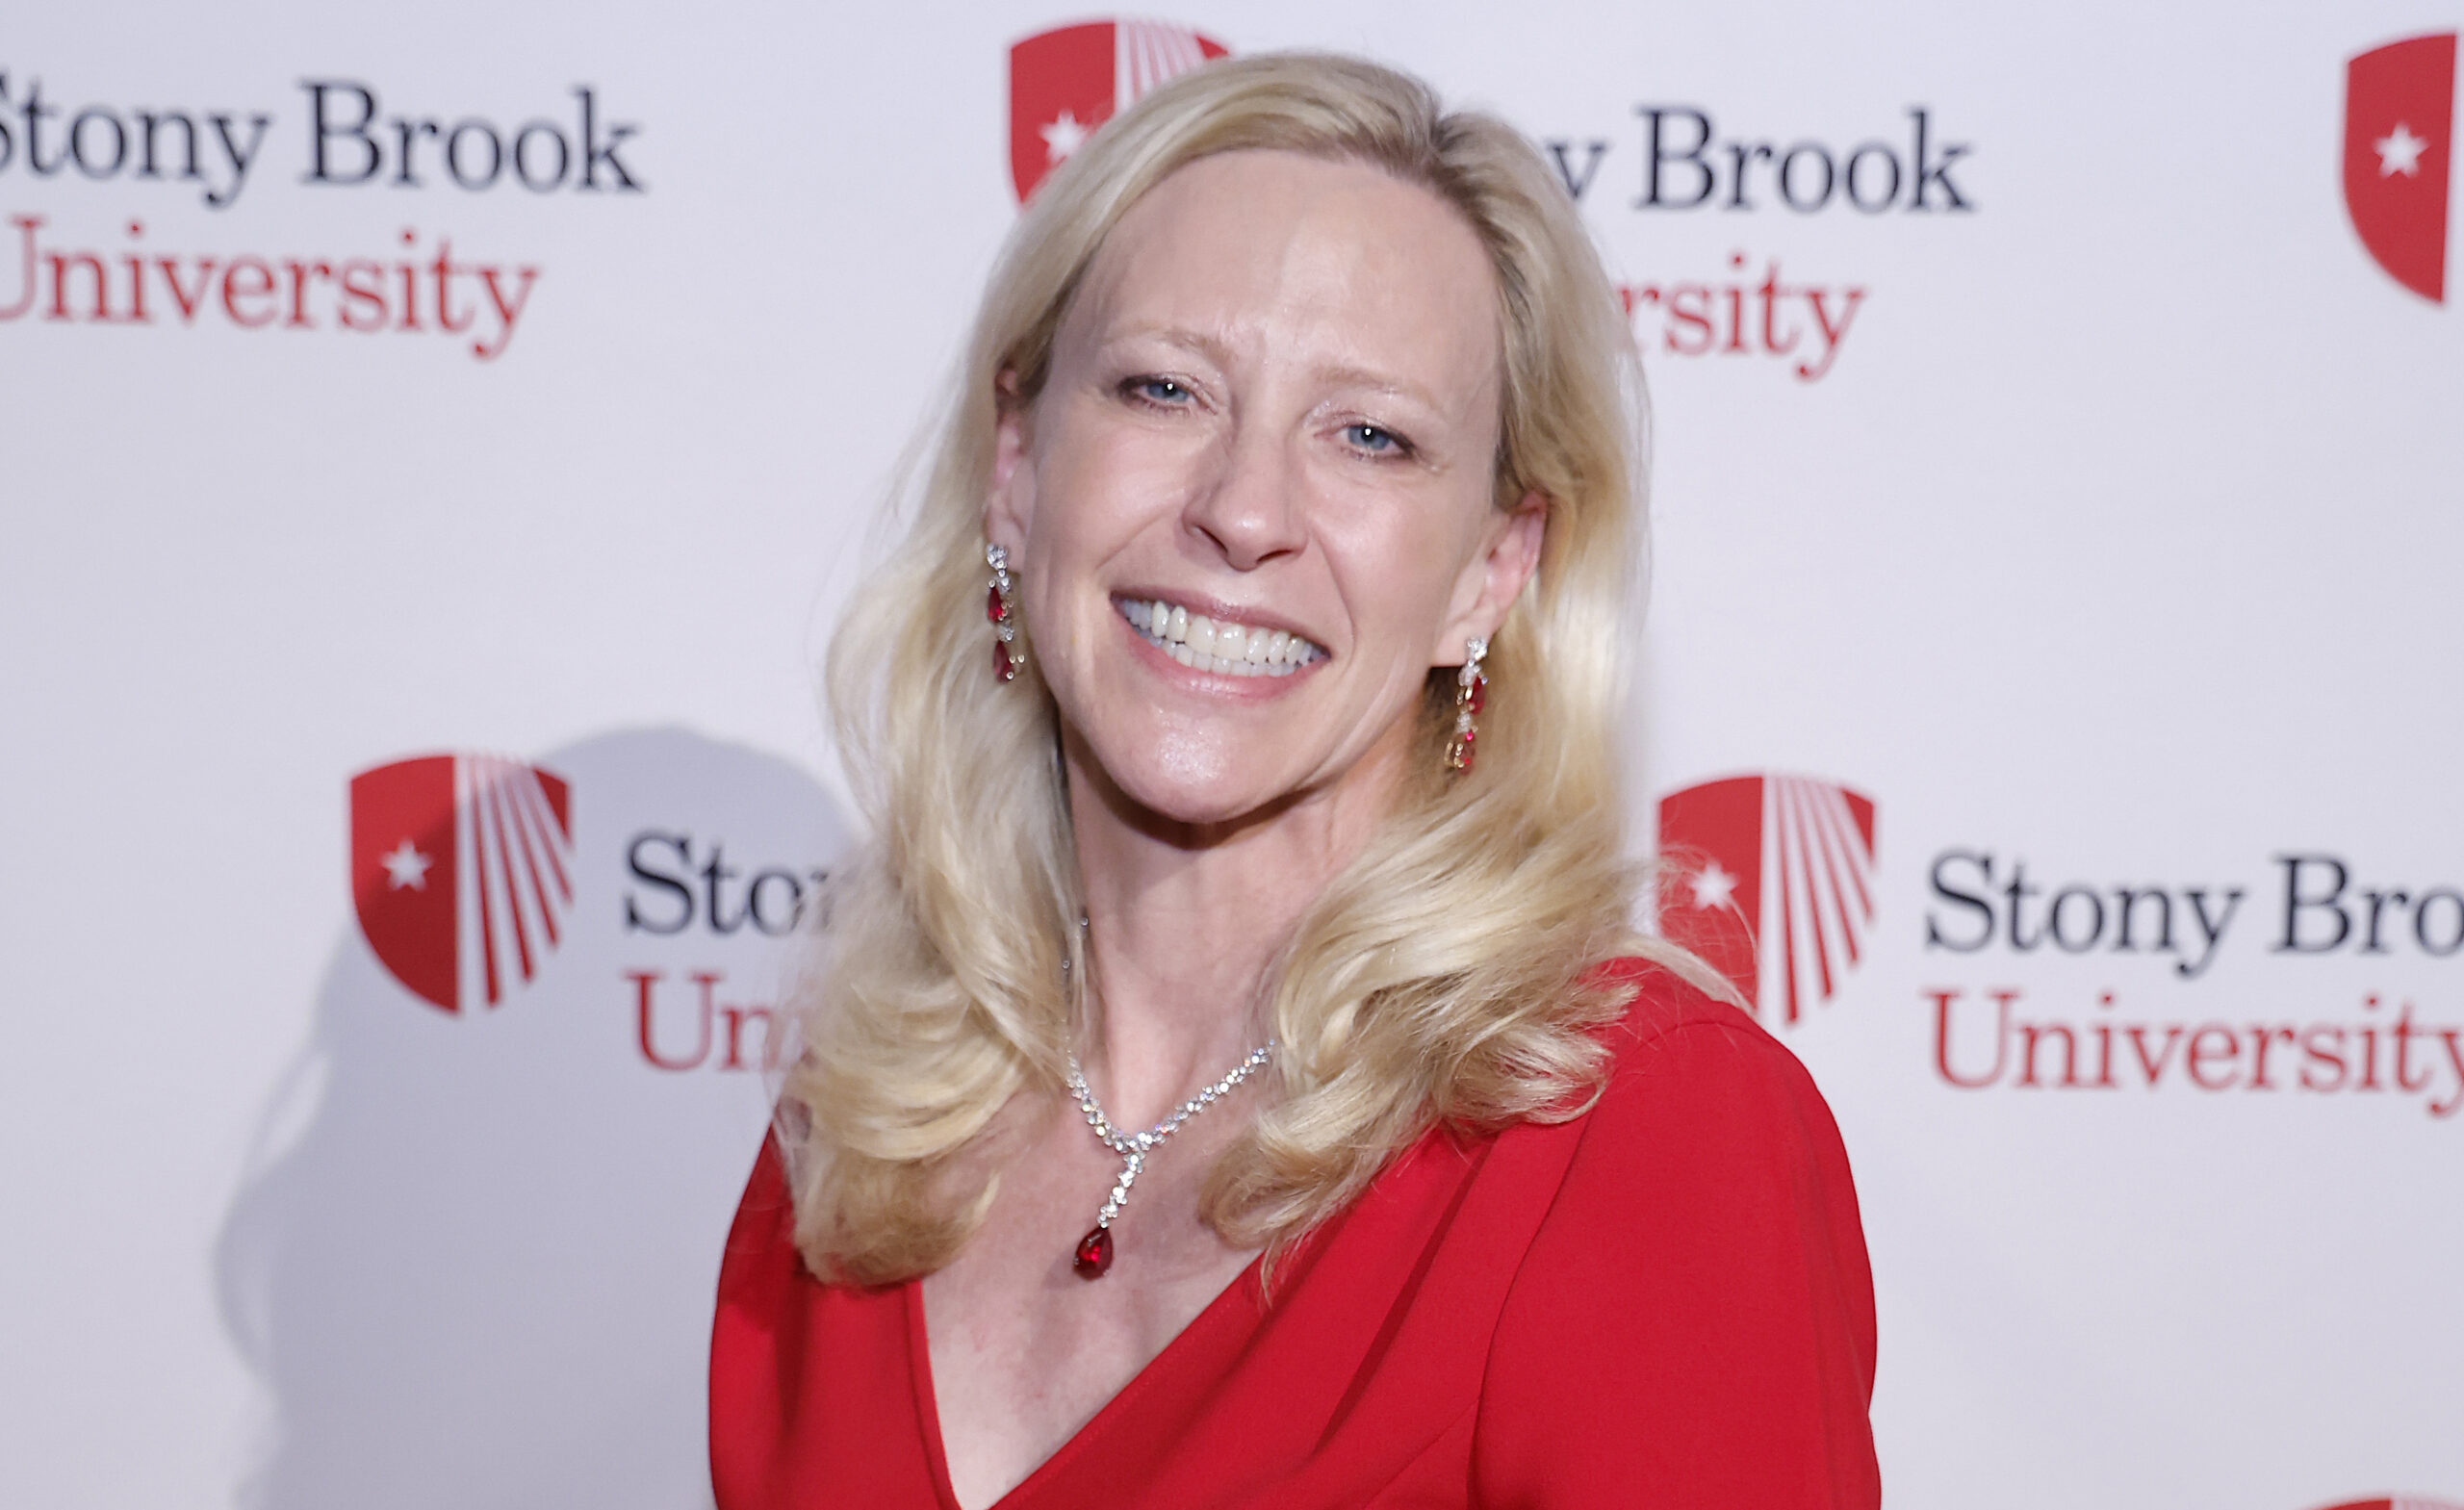 New Yale president, Maurie McInnis, received high marks for handling of protests at Stony Brook